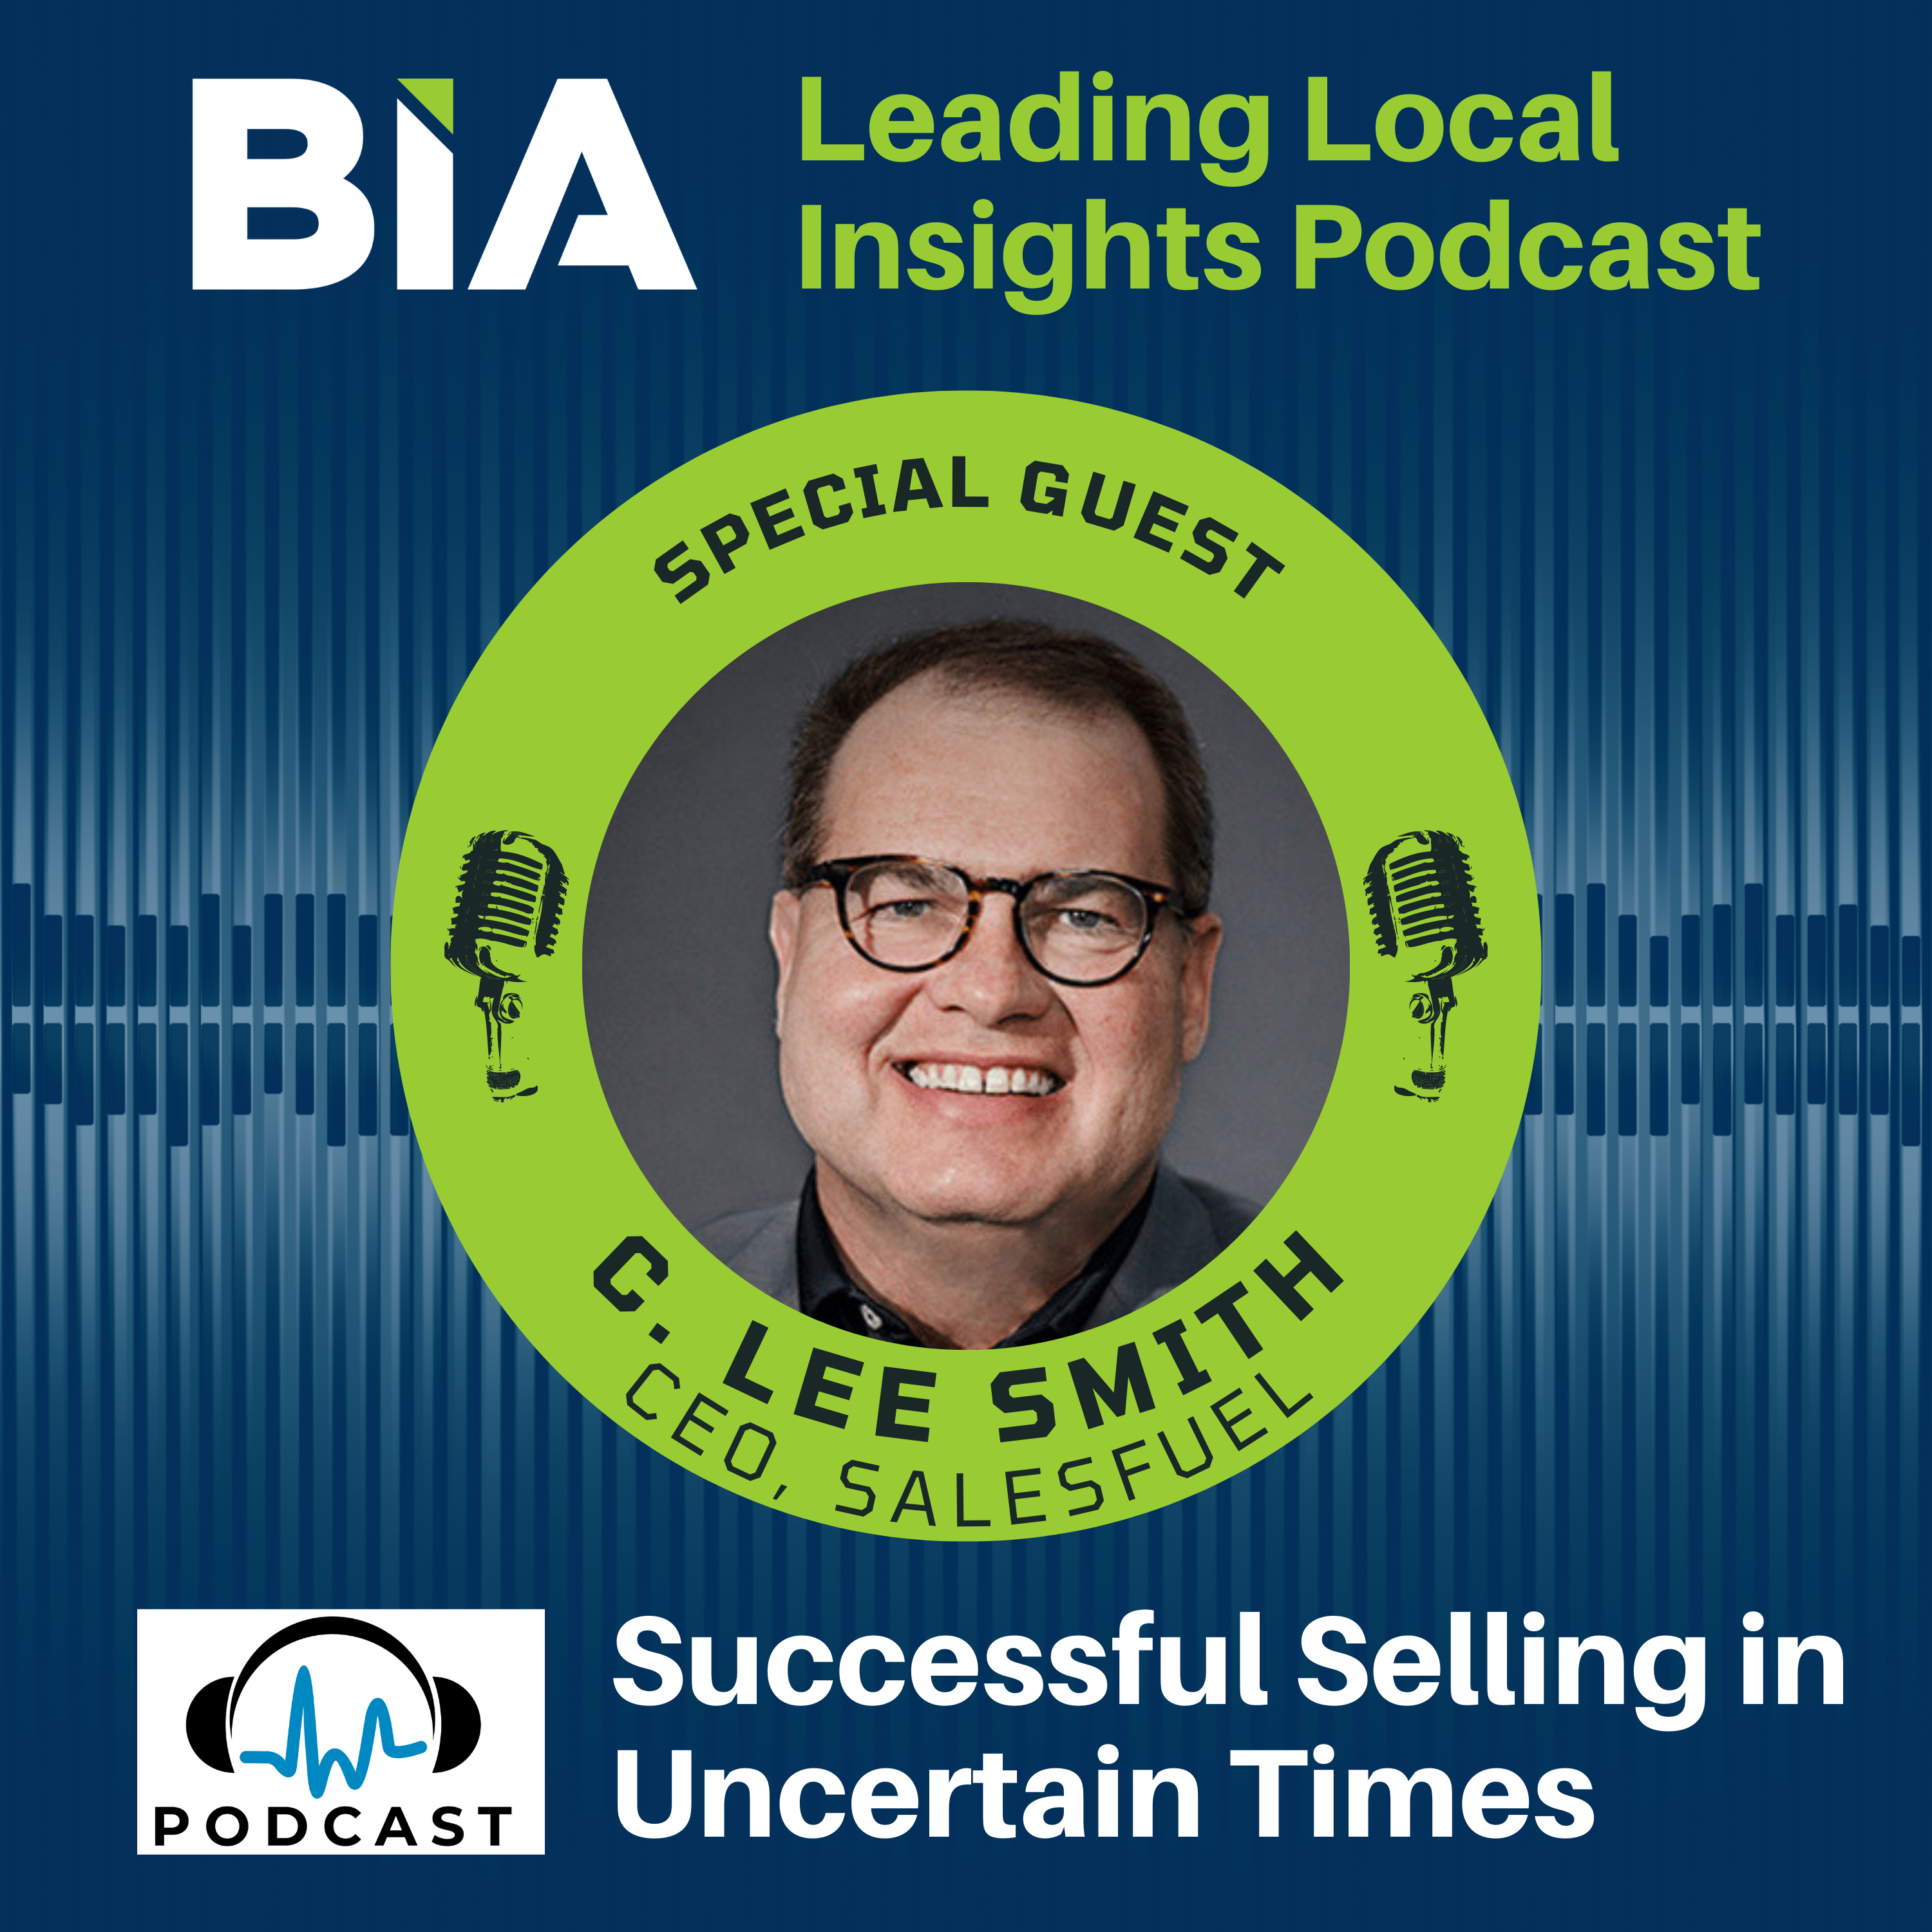 Leading Local Insights Podcast: Successful Selling In Uncertain Times